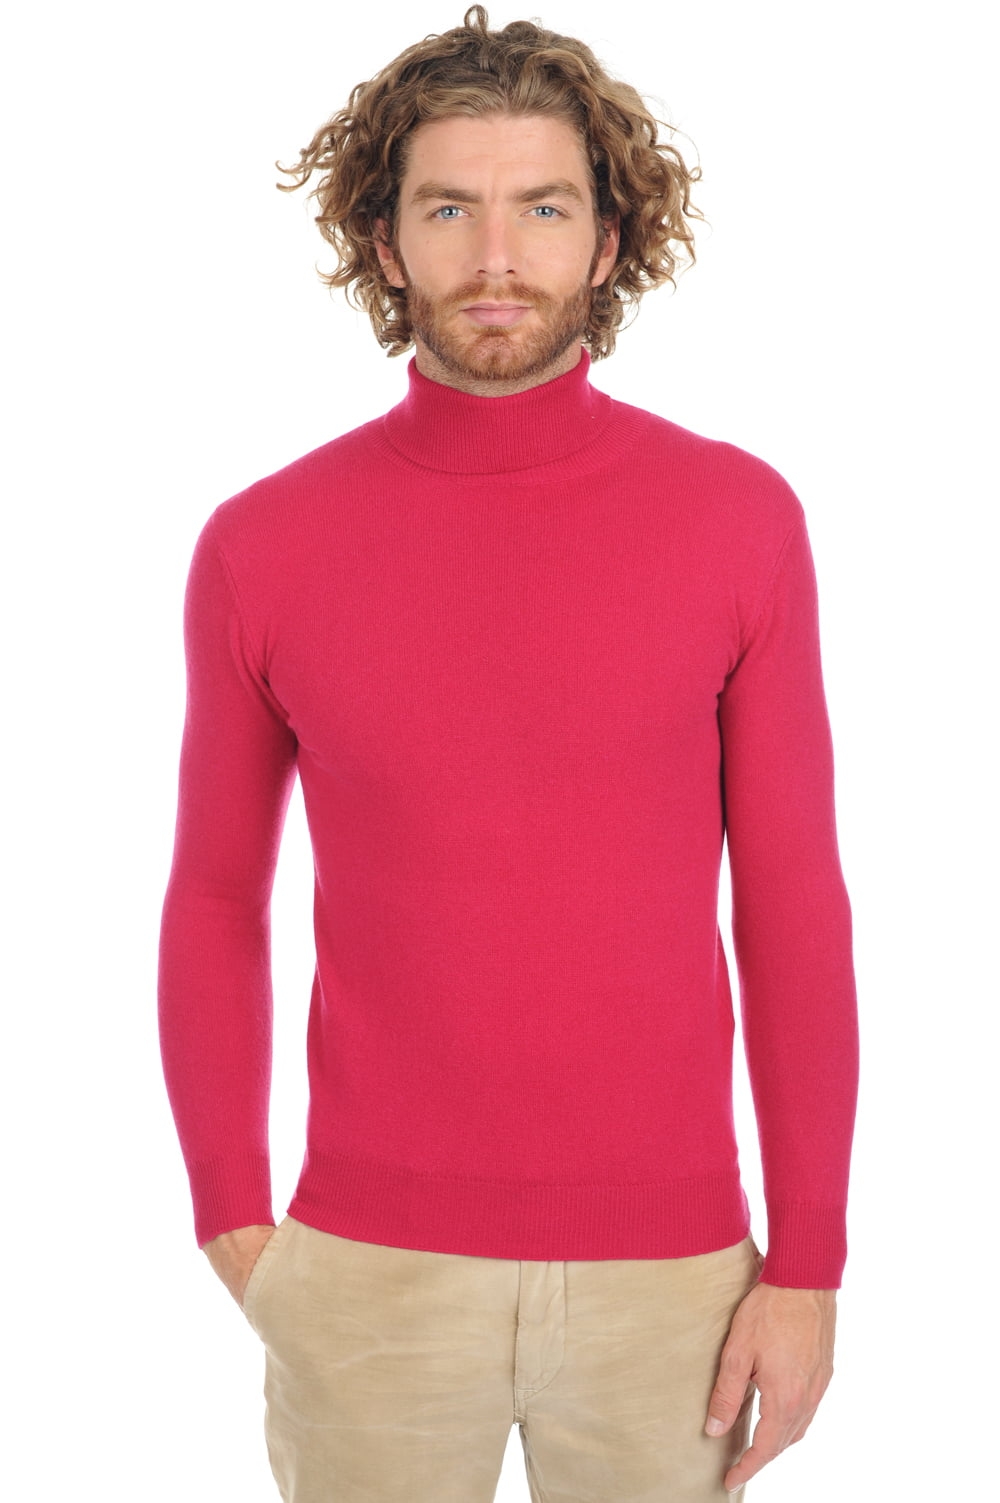 Cachemire pull homme col roule tarry first red fuschsia xl